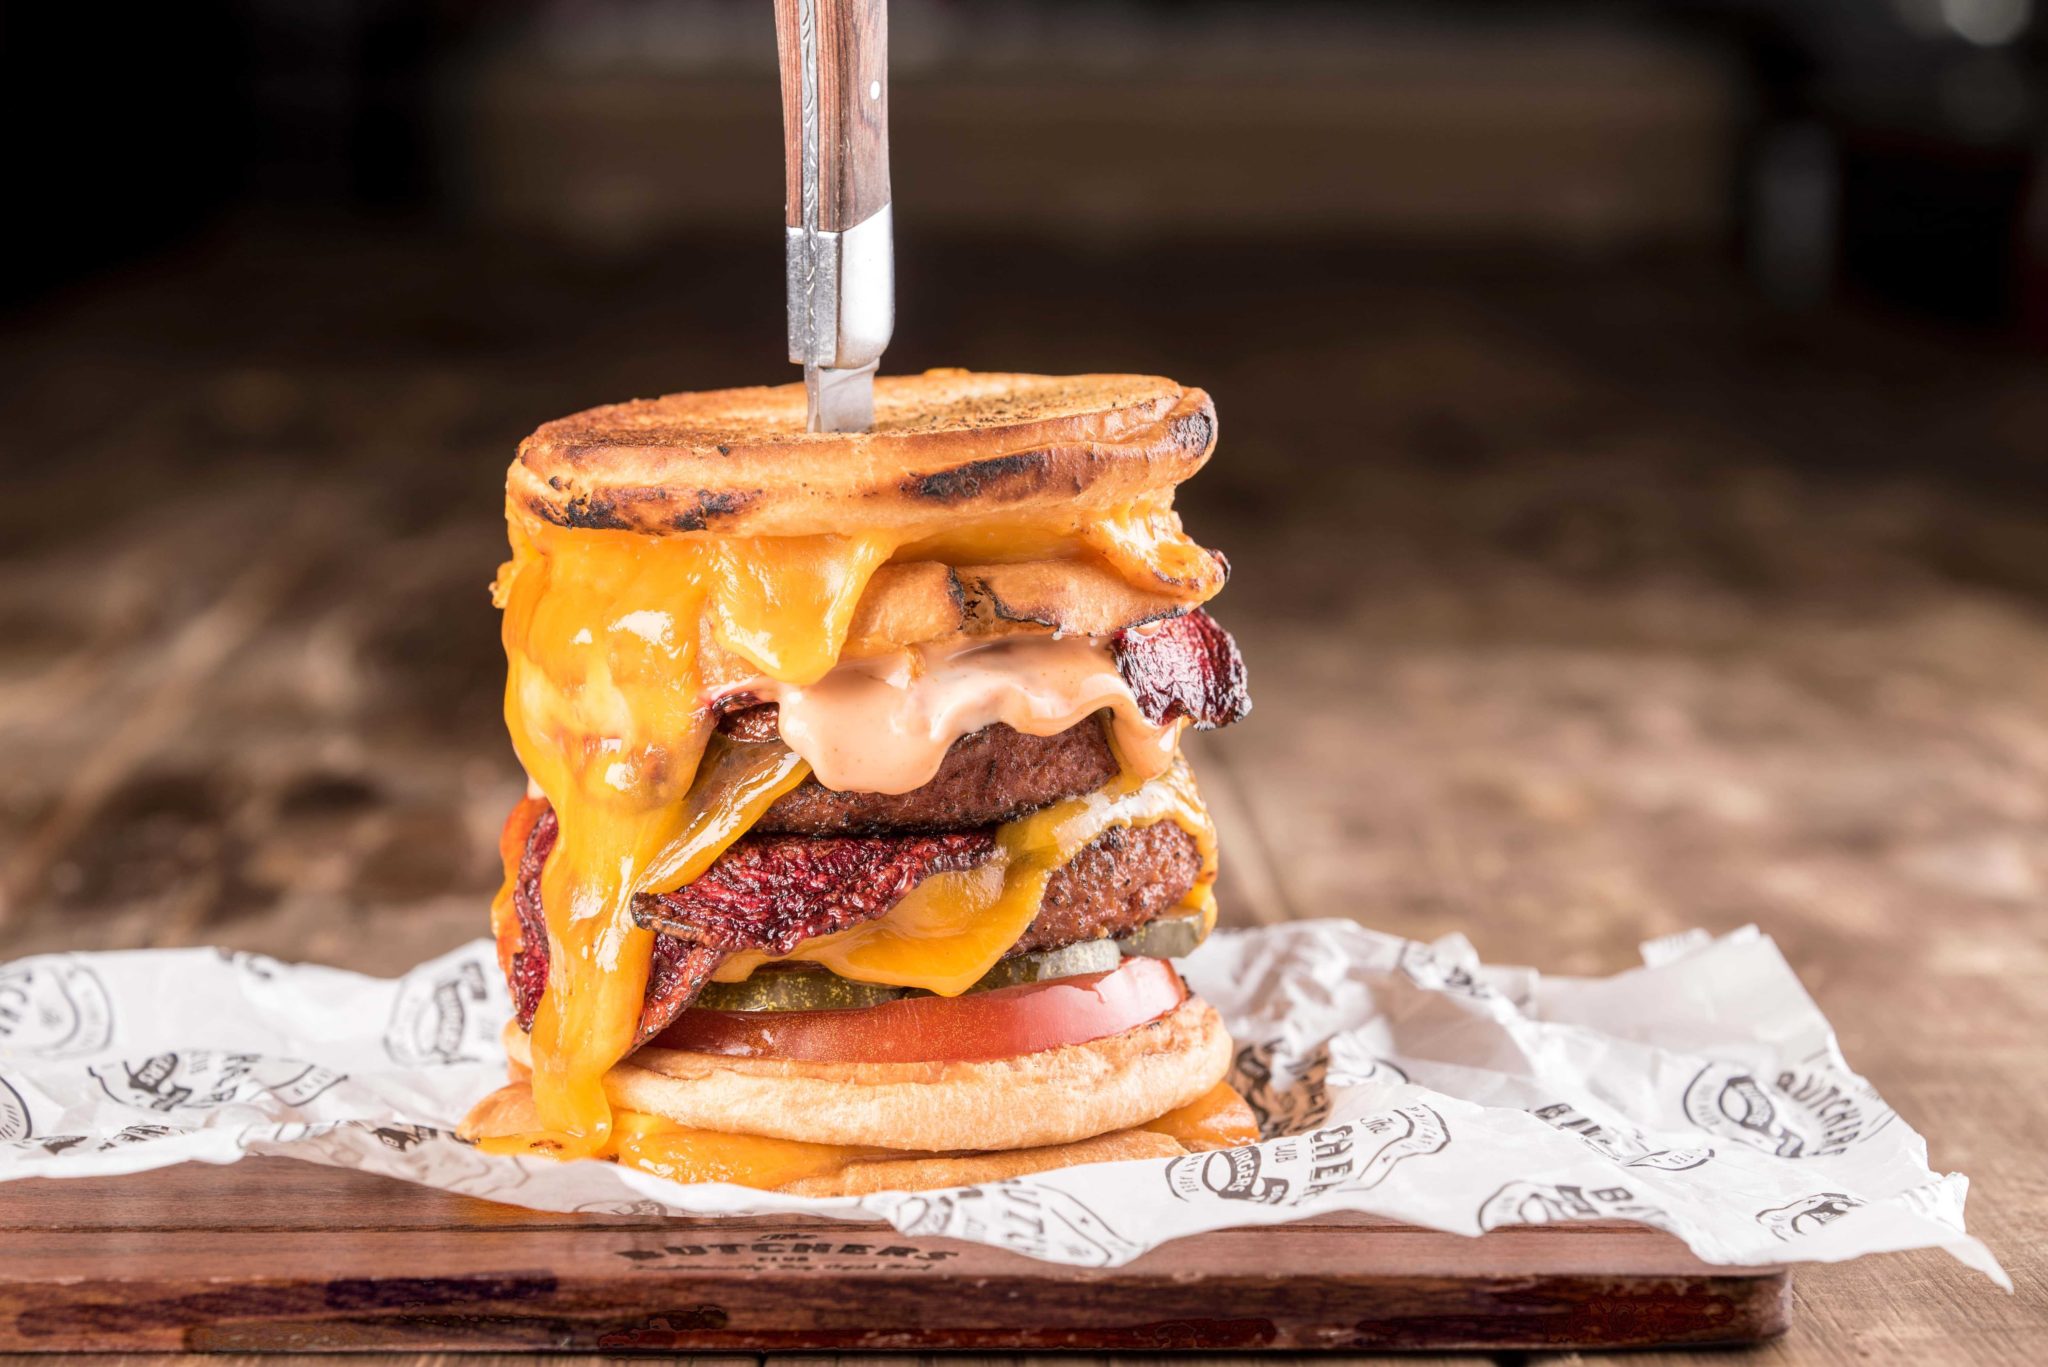 The success of the Beyond Burger in Hong Kong’s The Butchers Club suggests a growing market for plant-based protein on traditionally meat-centric menus.